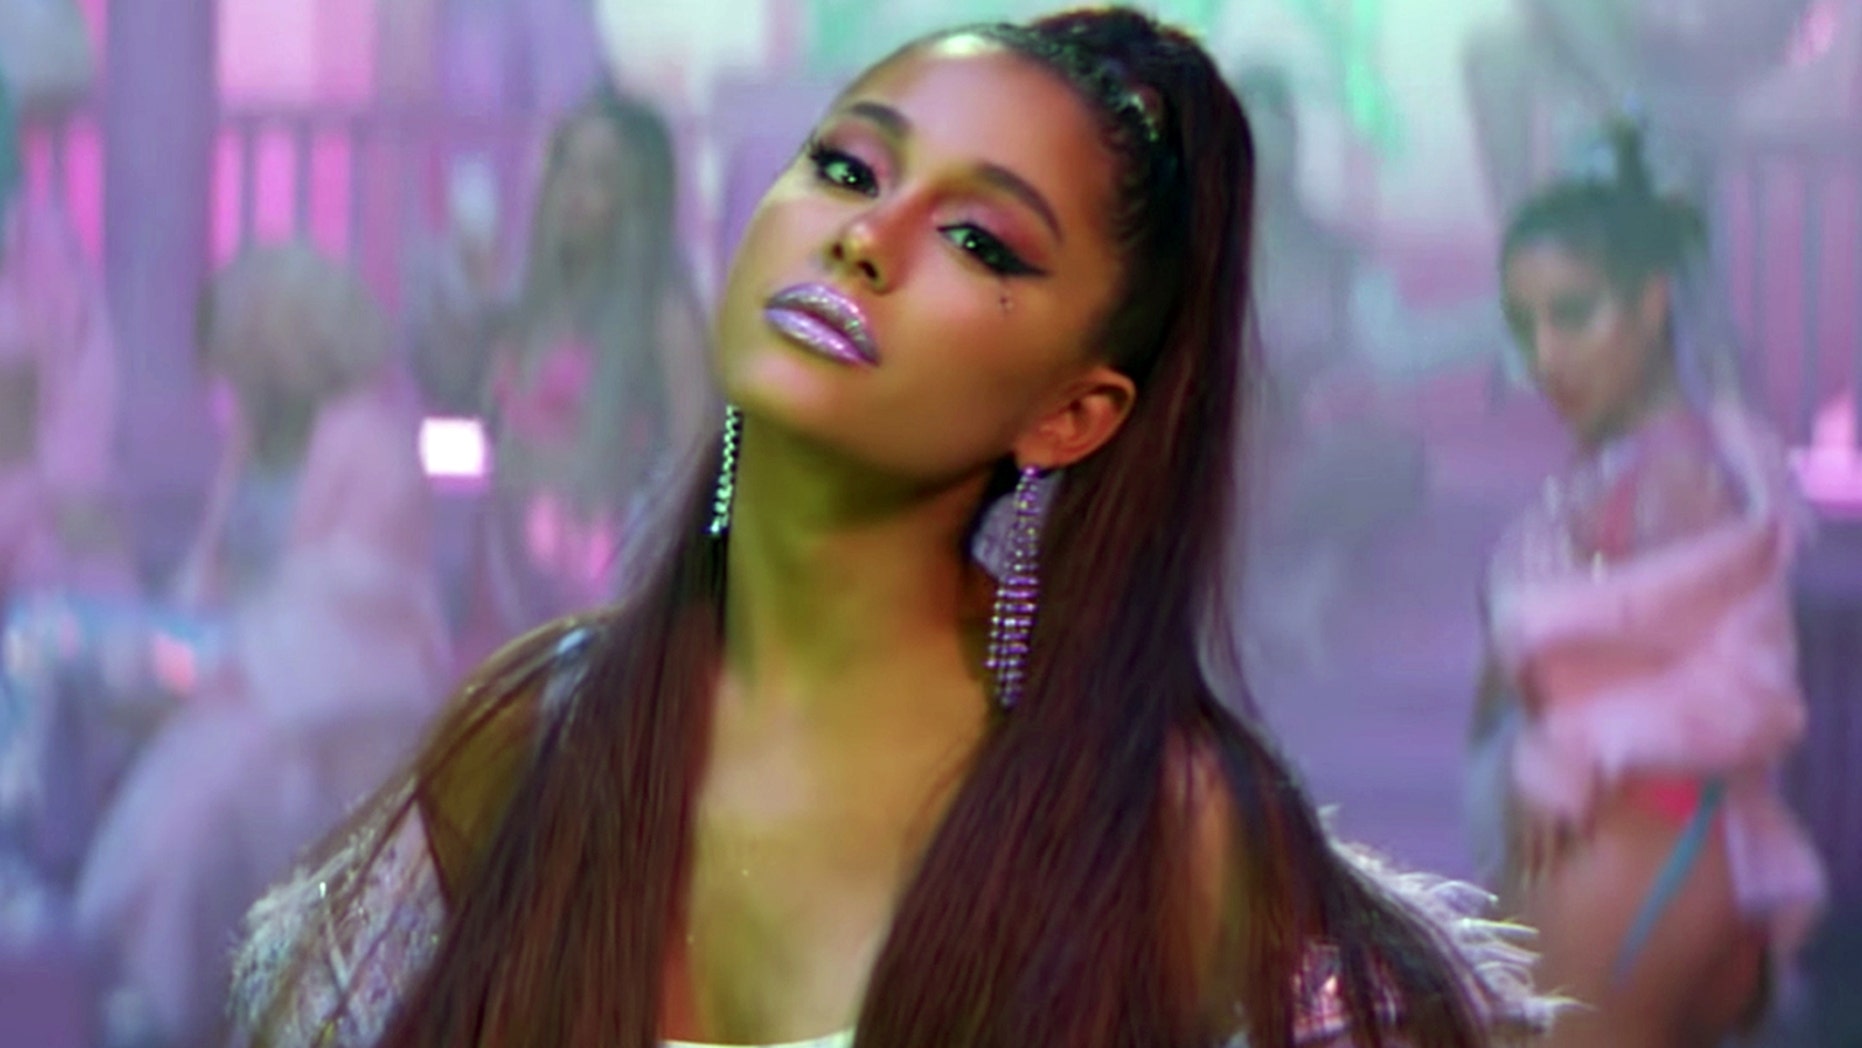 Two more rappers accuse Ariana Grande of copying their songs for 